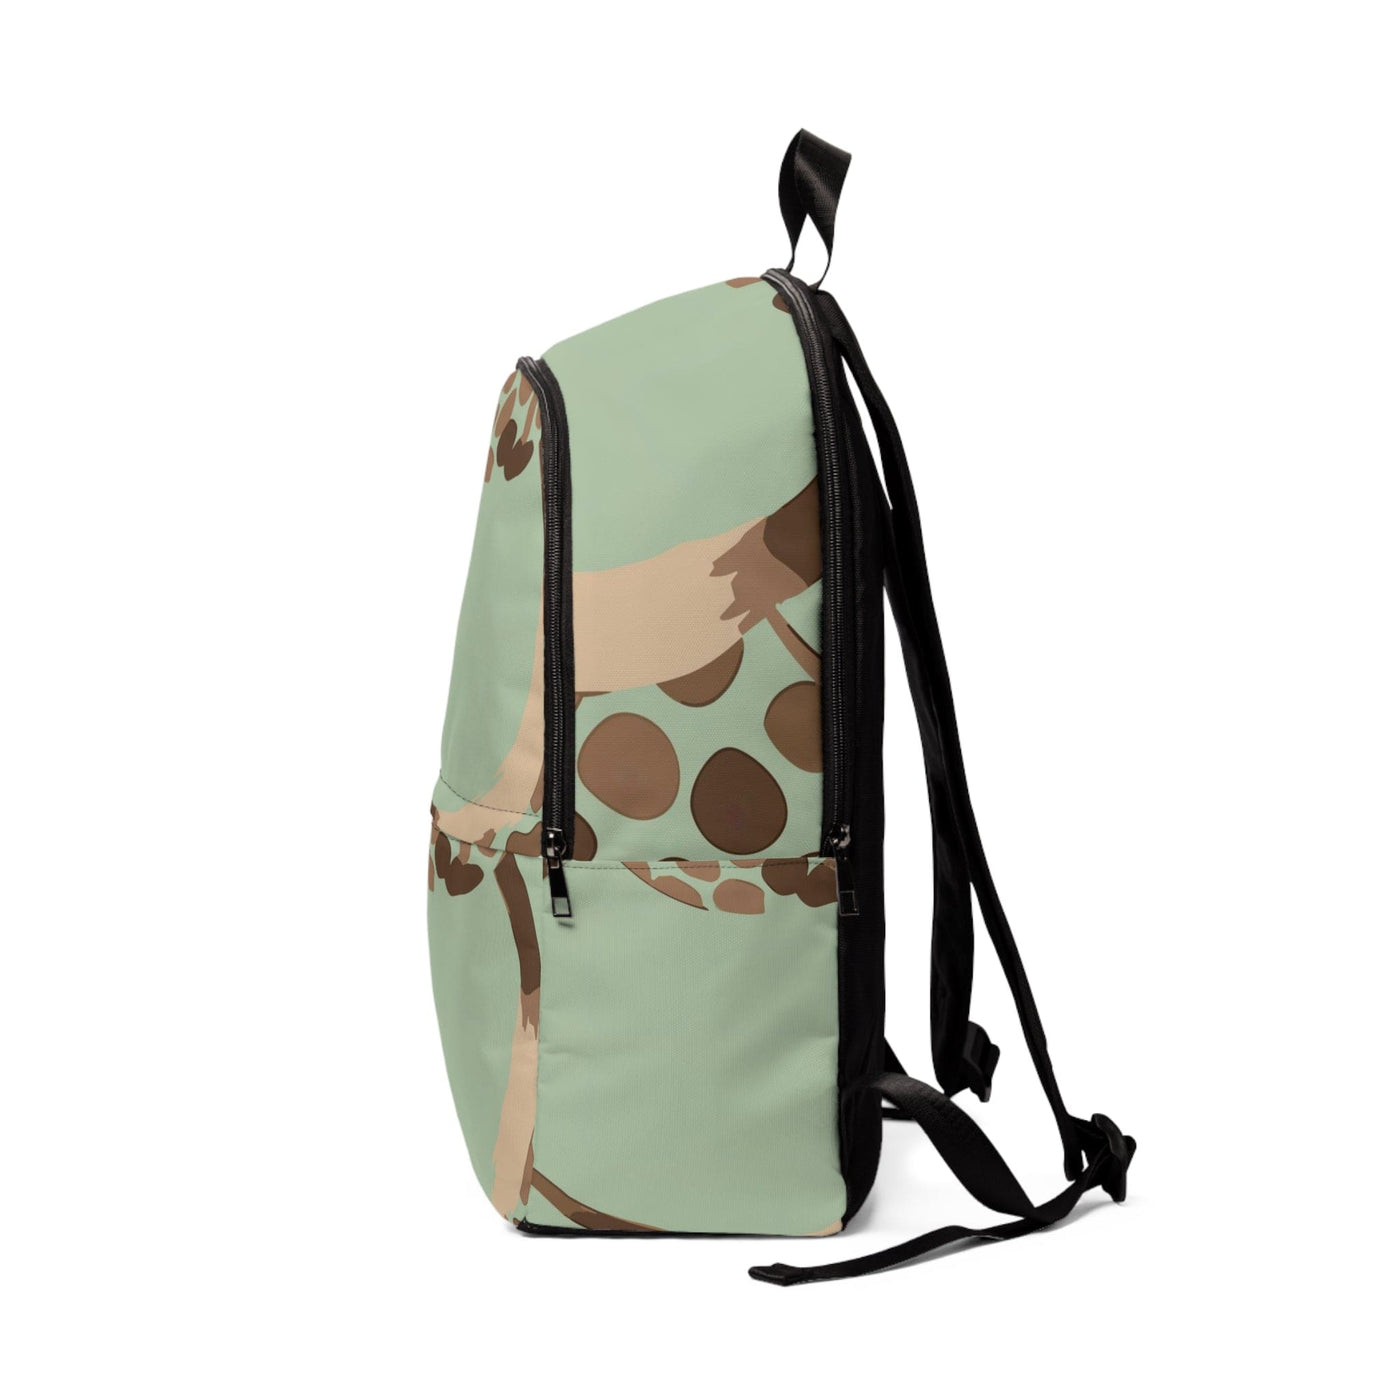 Fashion Backpack Waterproof Mint Green And Brown Spotted Illustration - Bags